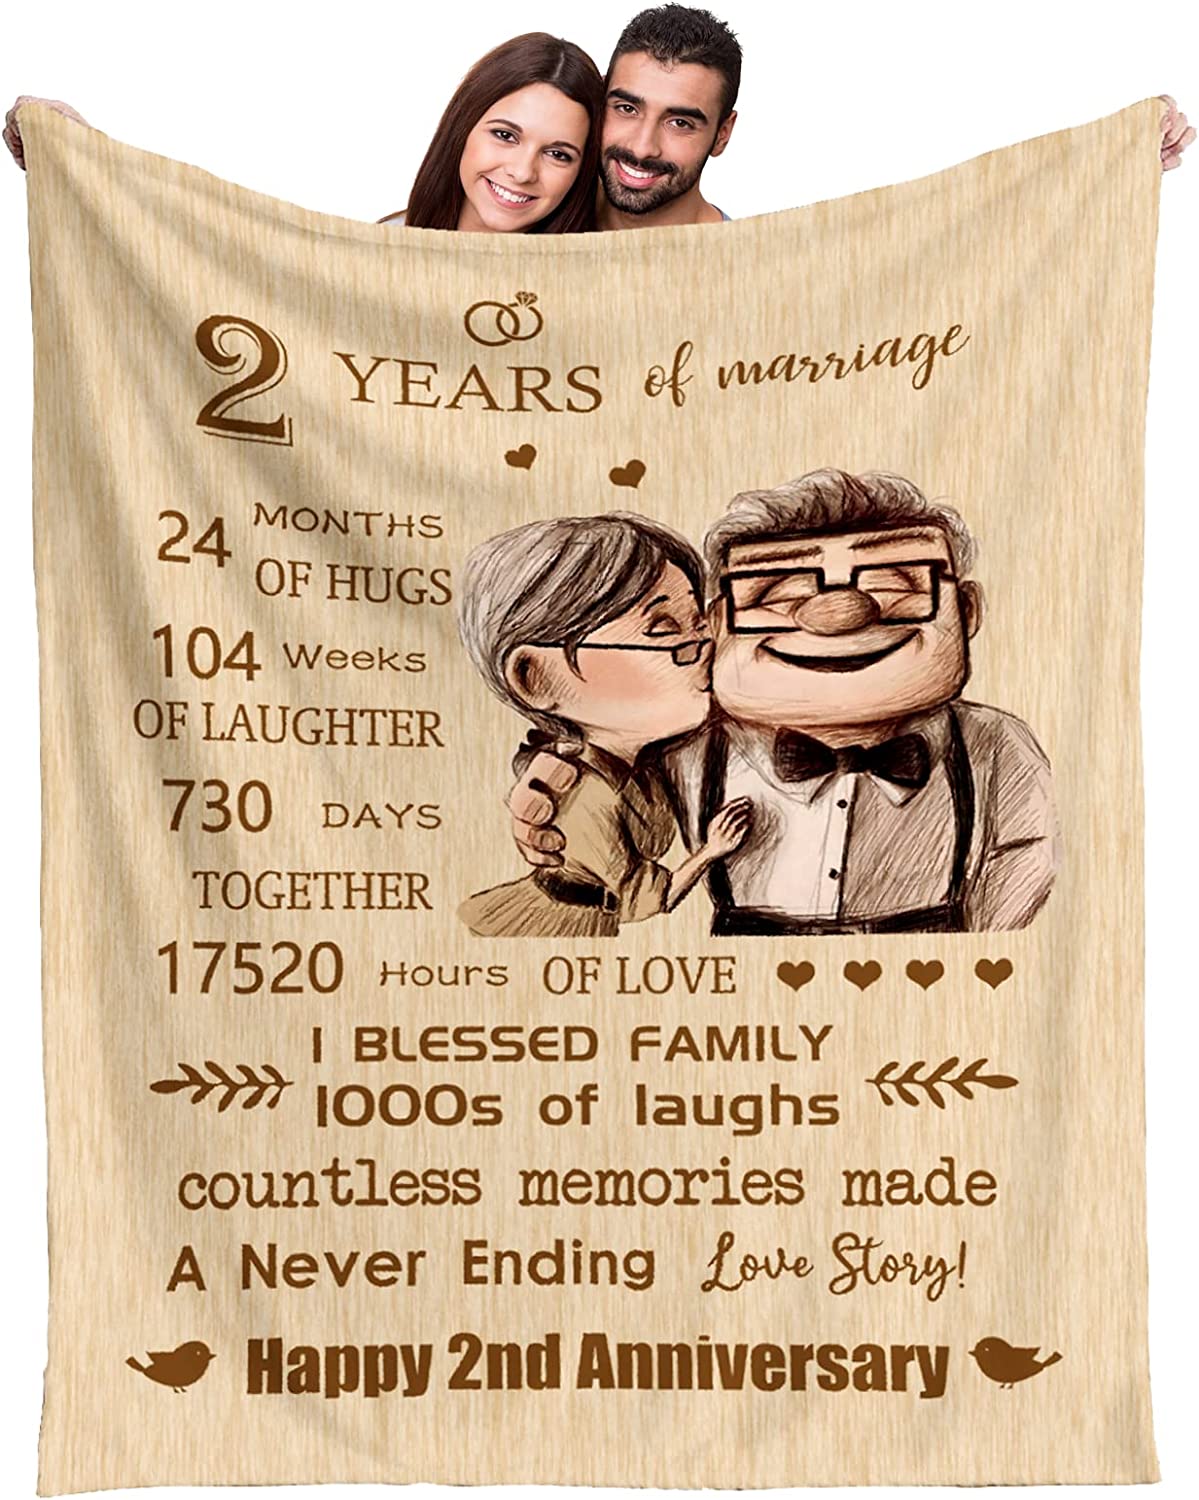 2nd Anniversary Blanket Gifts Wedding for 2nd, 2 Years of Marriage Gift for Wife, Parents, Friends 2nd Wedding Idea Valentine's Day Gift Idea